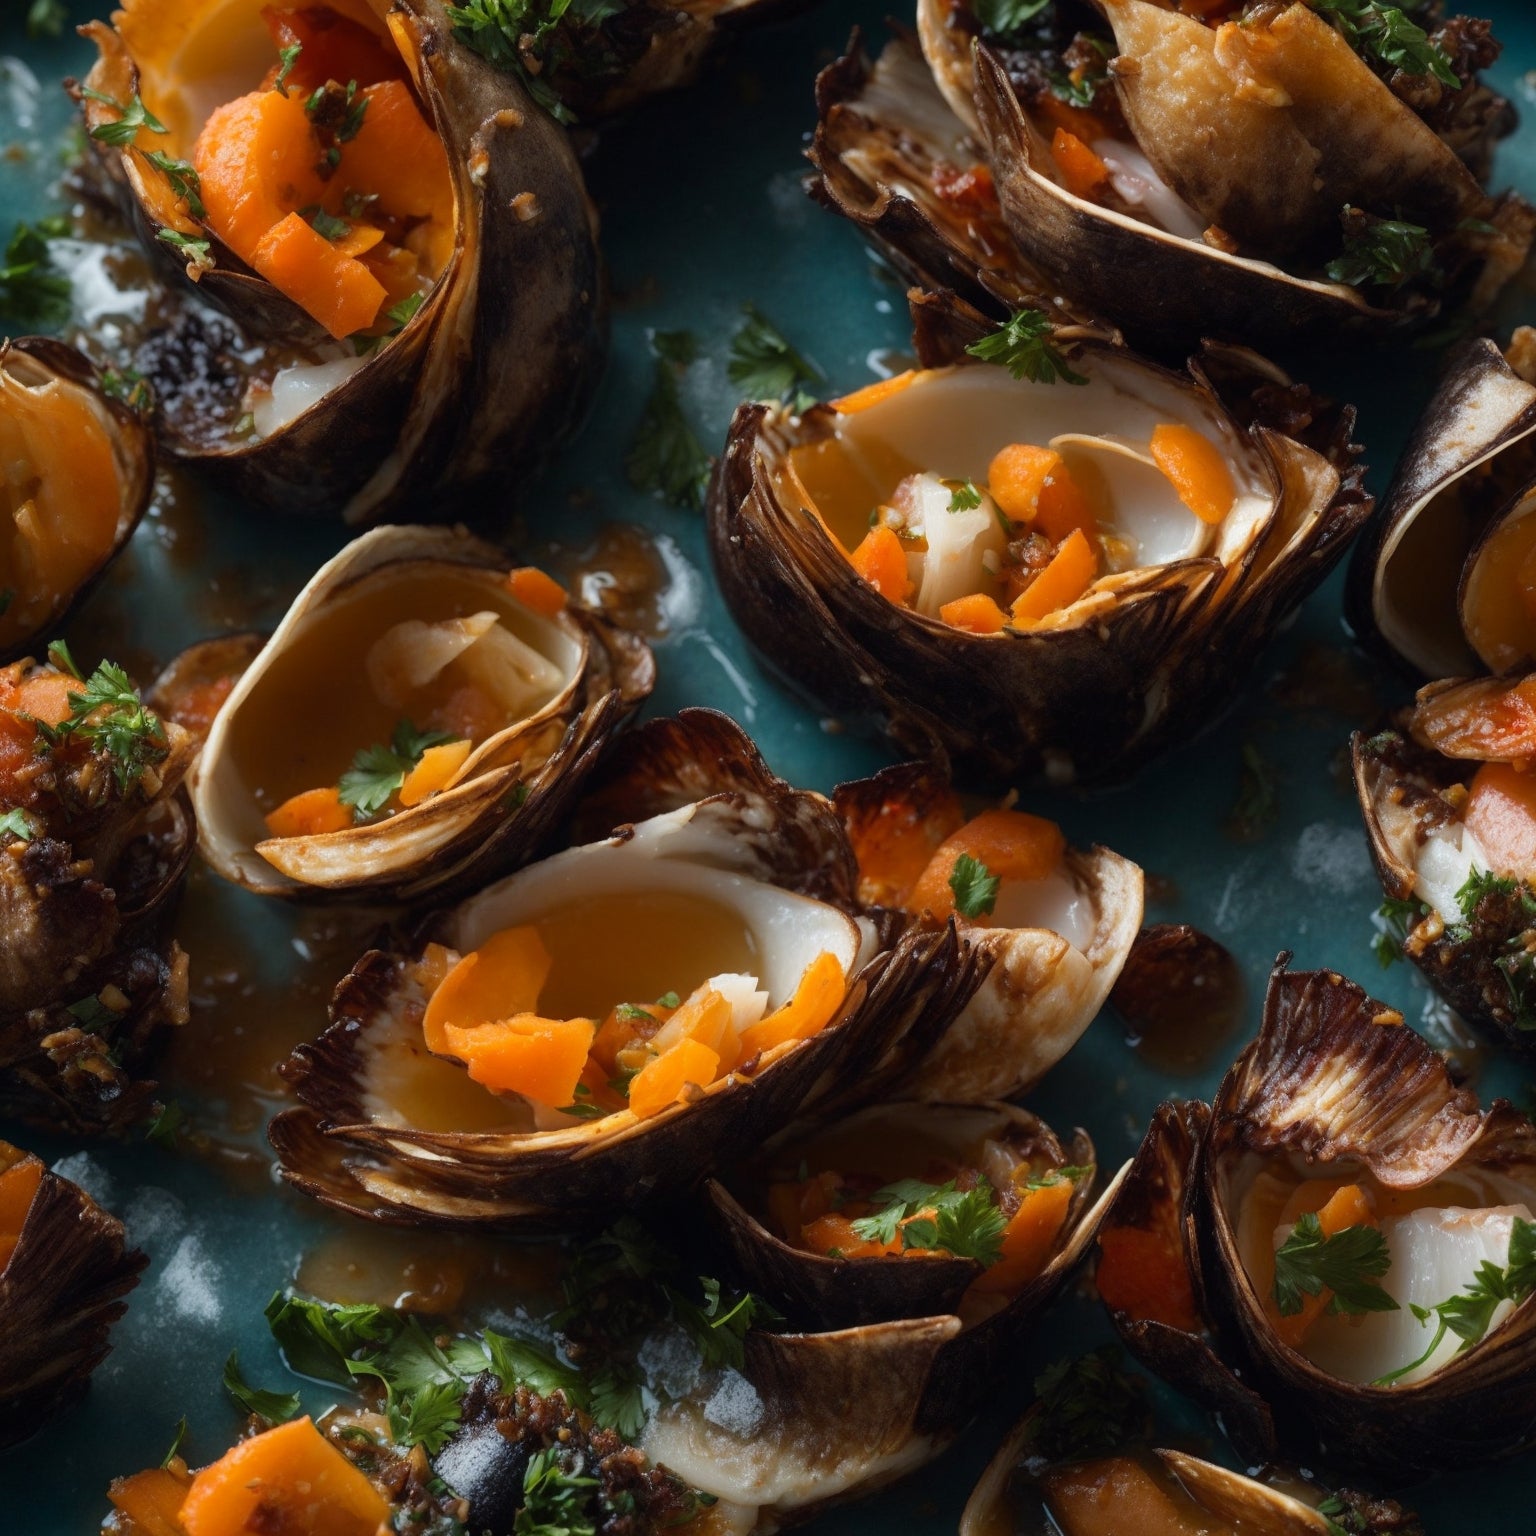 Culinary Delight from the Ocean: Cooking with Gooseneck Barnacles